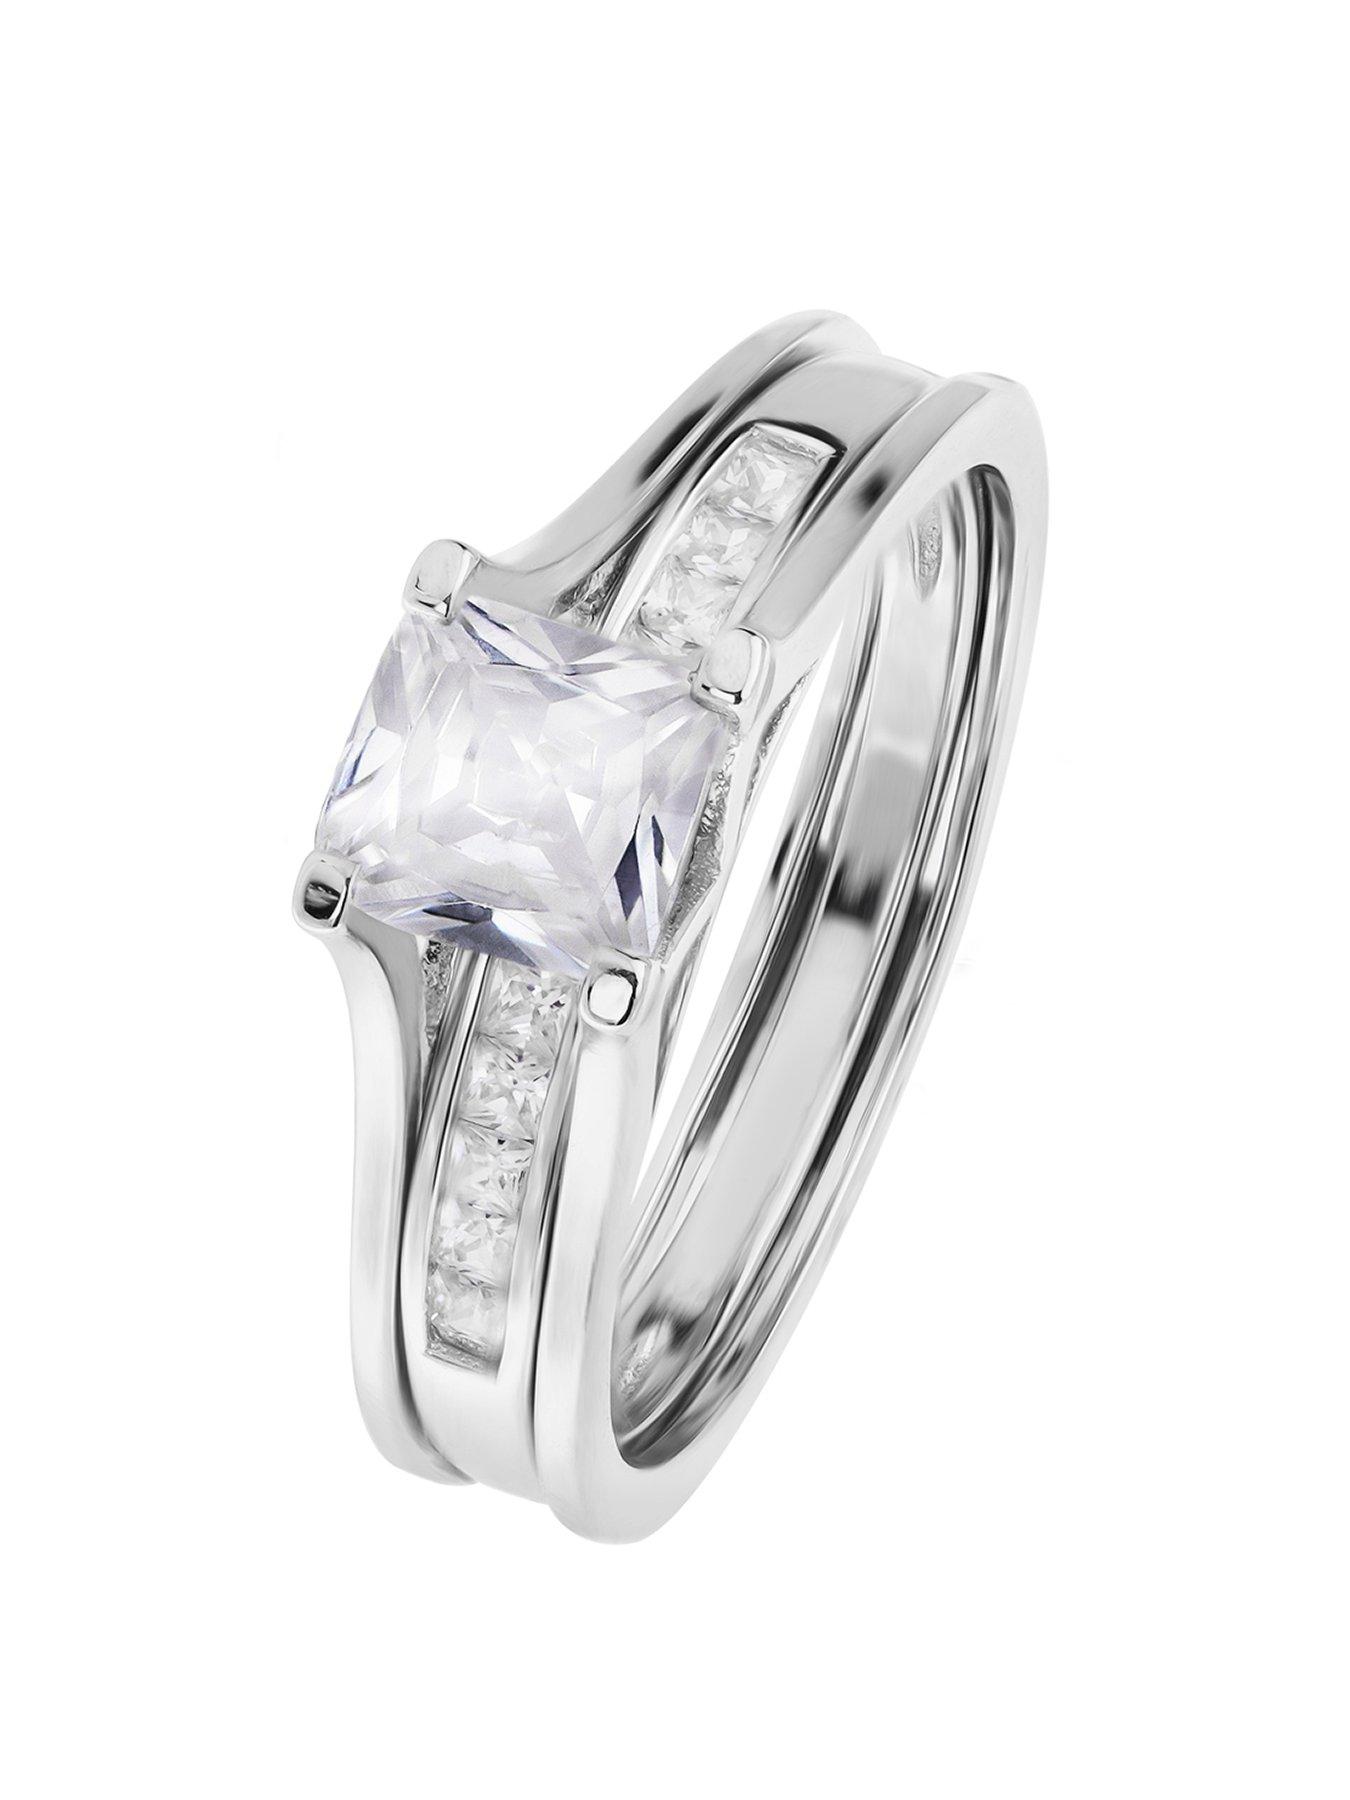 Jewellery & watches Sterling Silver Rhodium Plated 2 piece Bridal Set - Princess & Eternity Ring